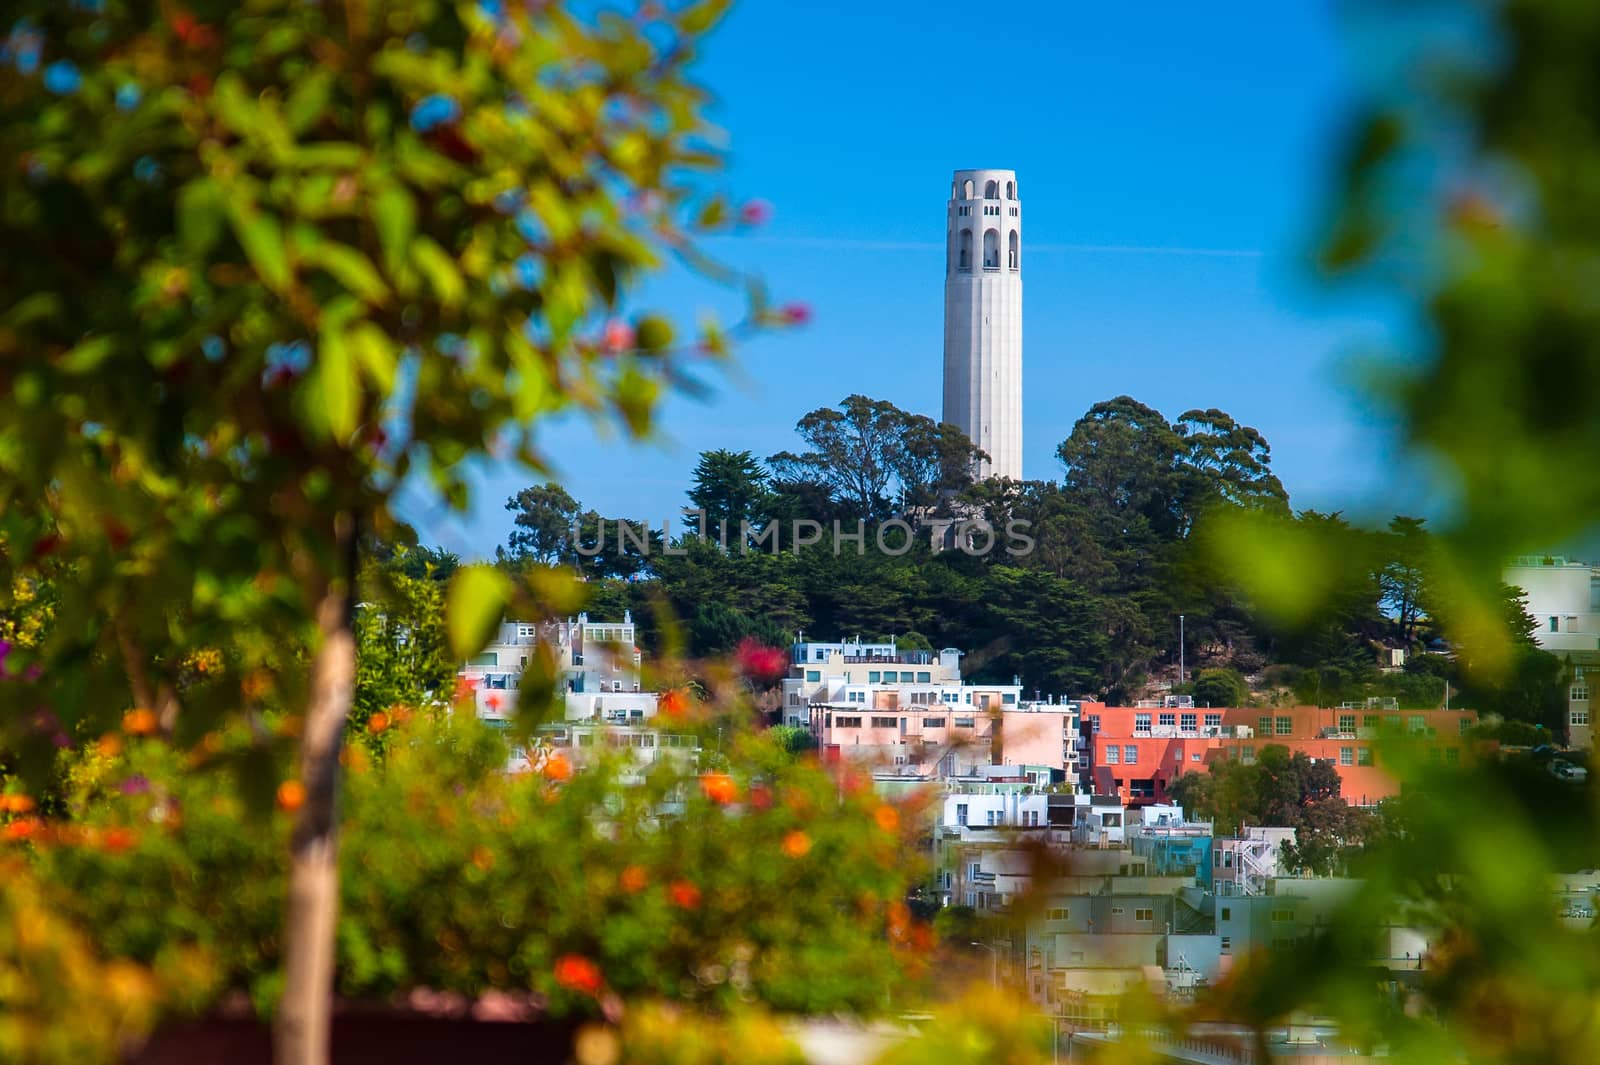 Coit Tower on Telegraph Hill by CelsoDiniz